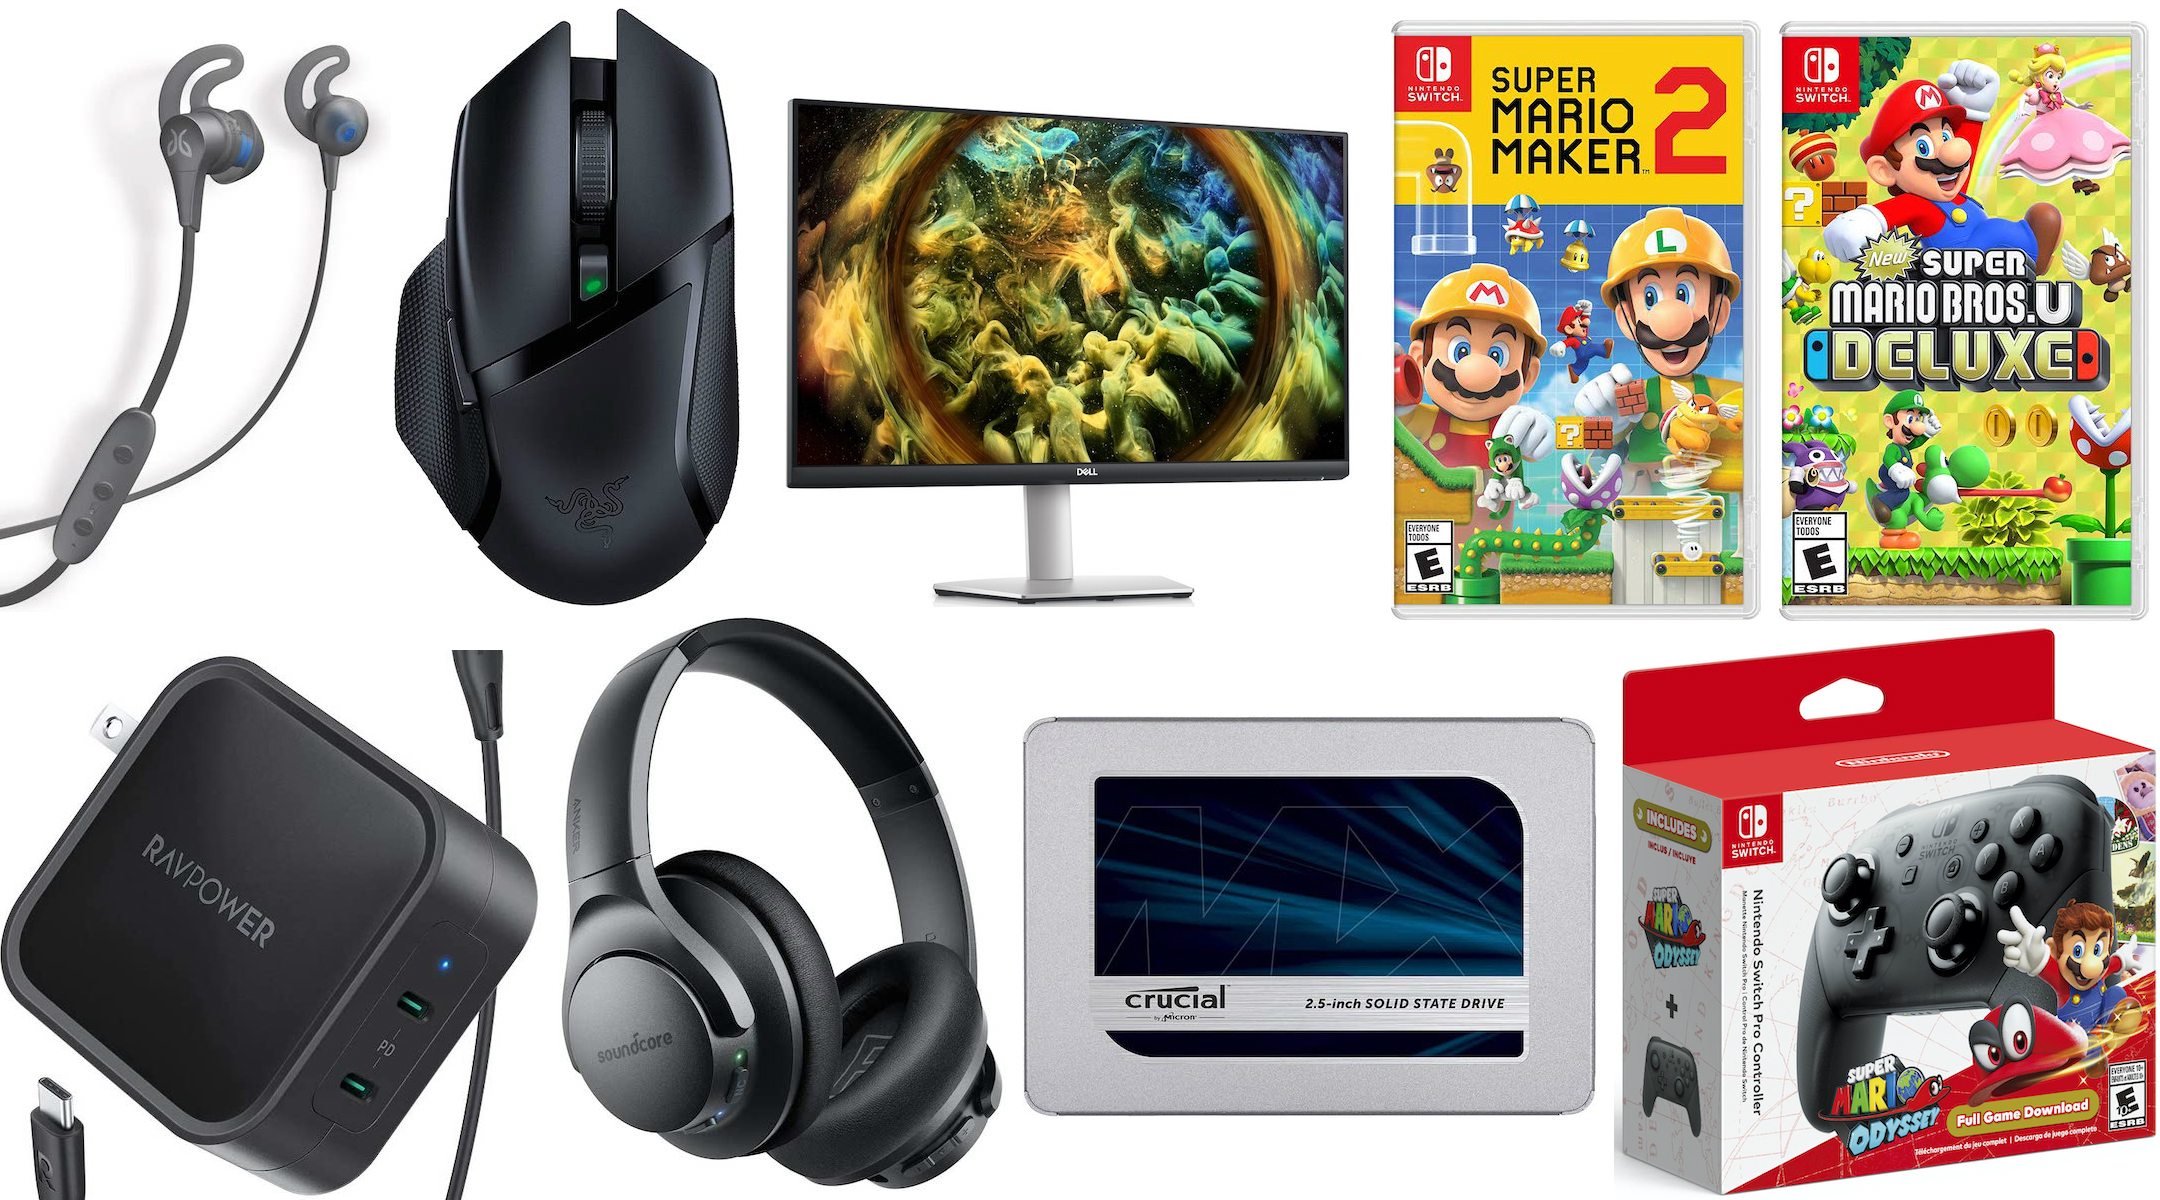 Grab leftover Labor Day deals on Switch games, Dell monitors, and more |  Ars Technica